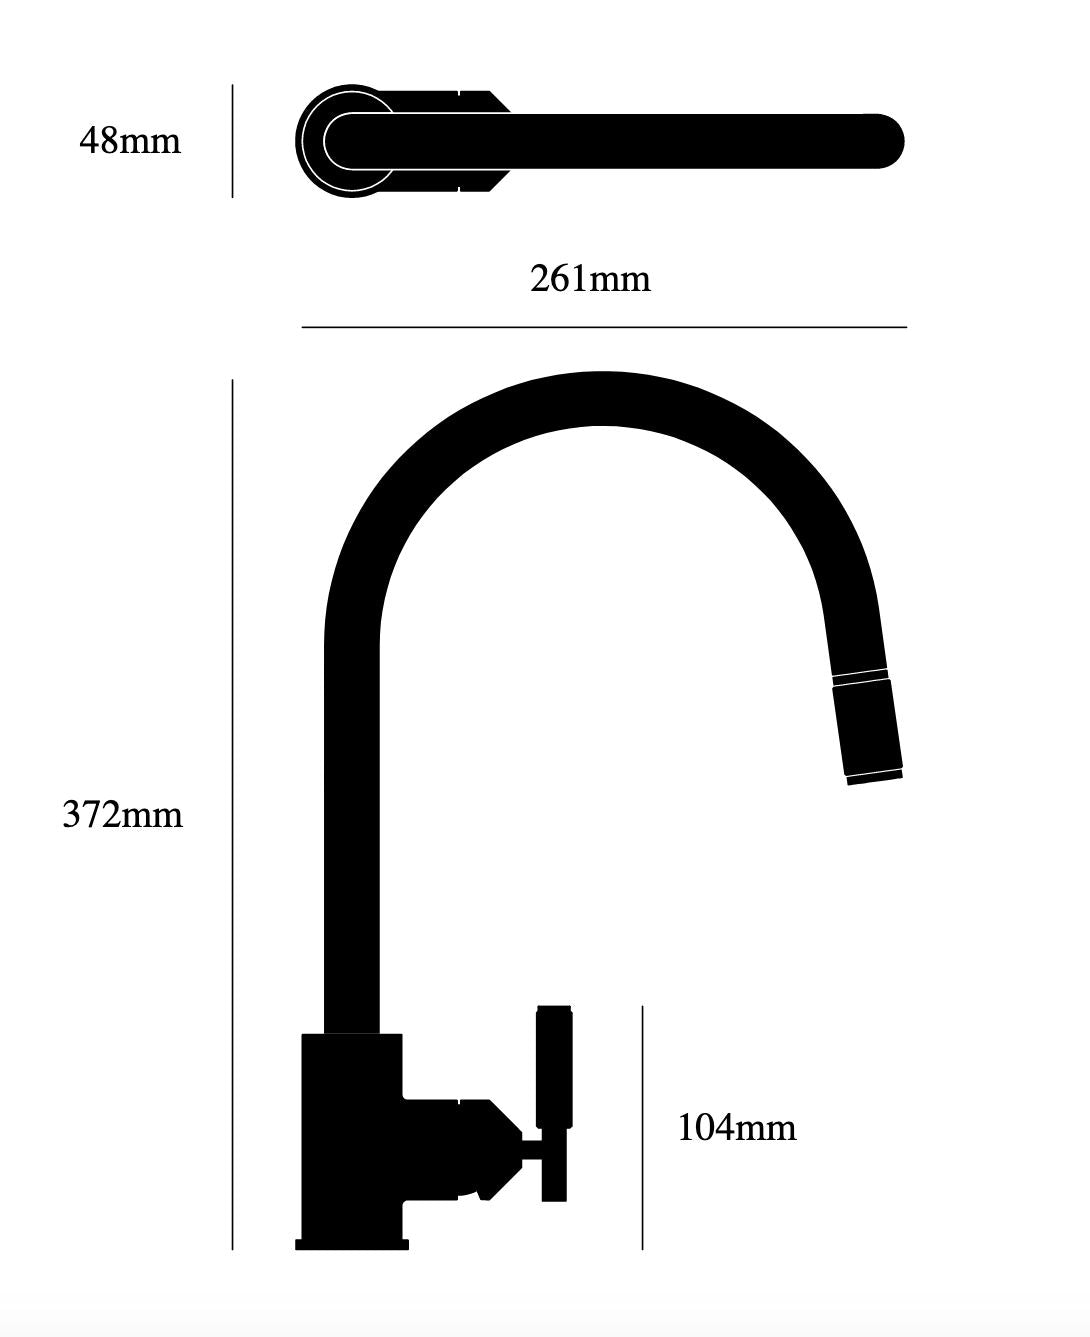 Luxury Buster and Punch Pull Out Kitchen Faucet BRASS - |VESIMI Design| Luxury and Rustic bathrooms online